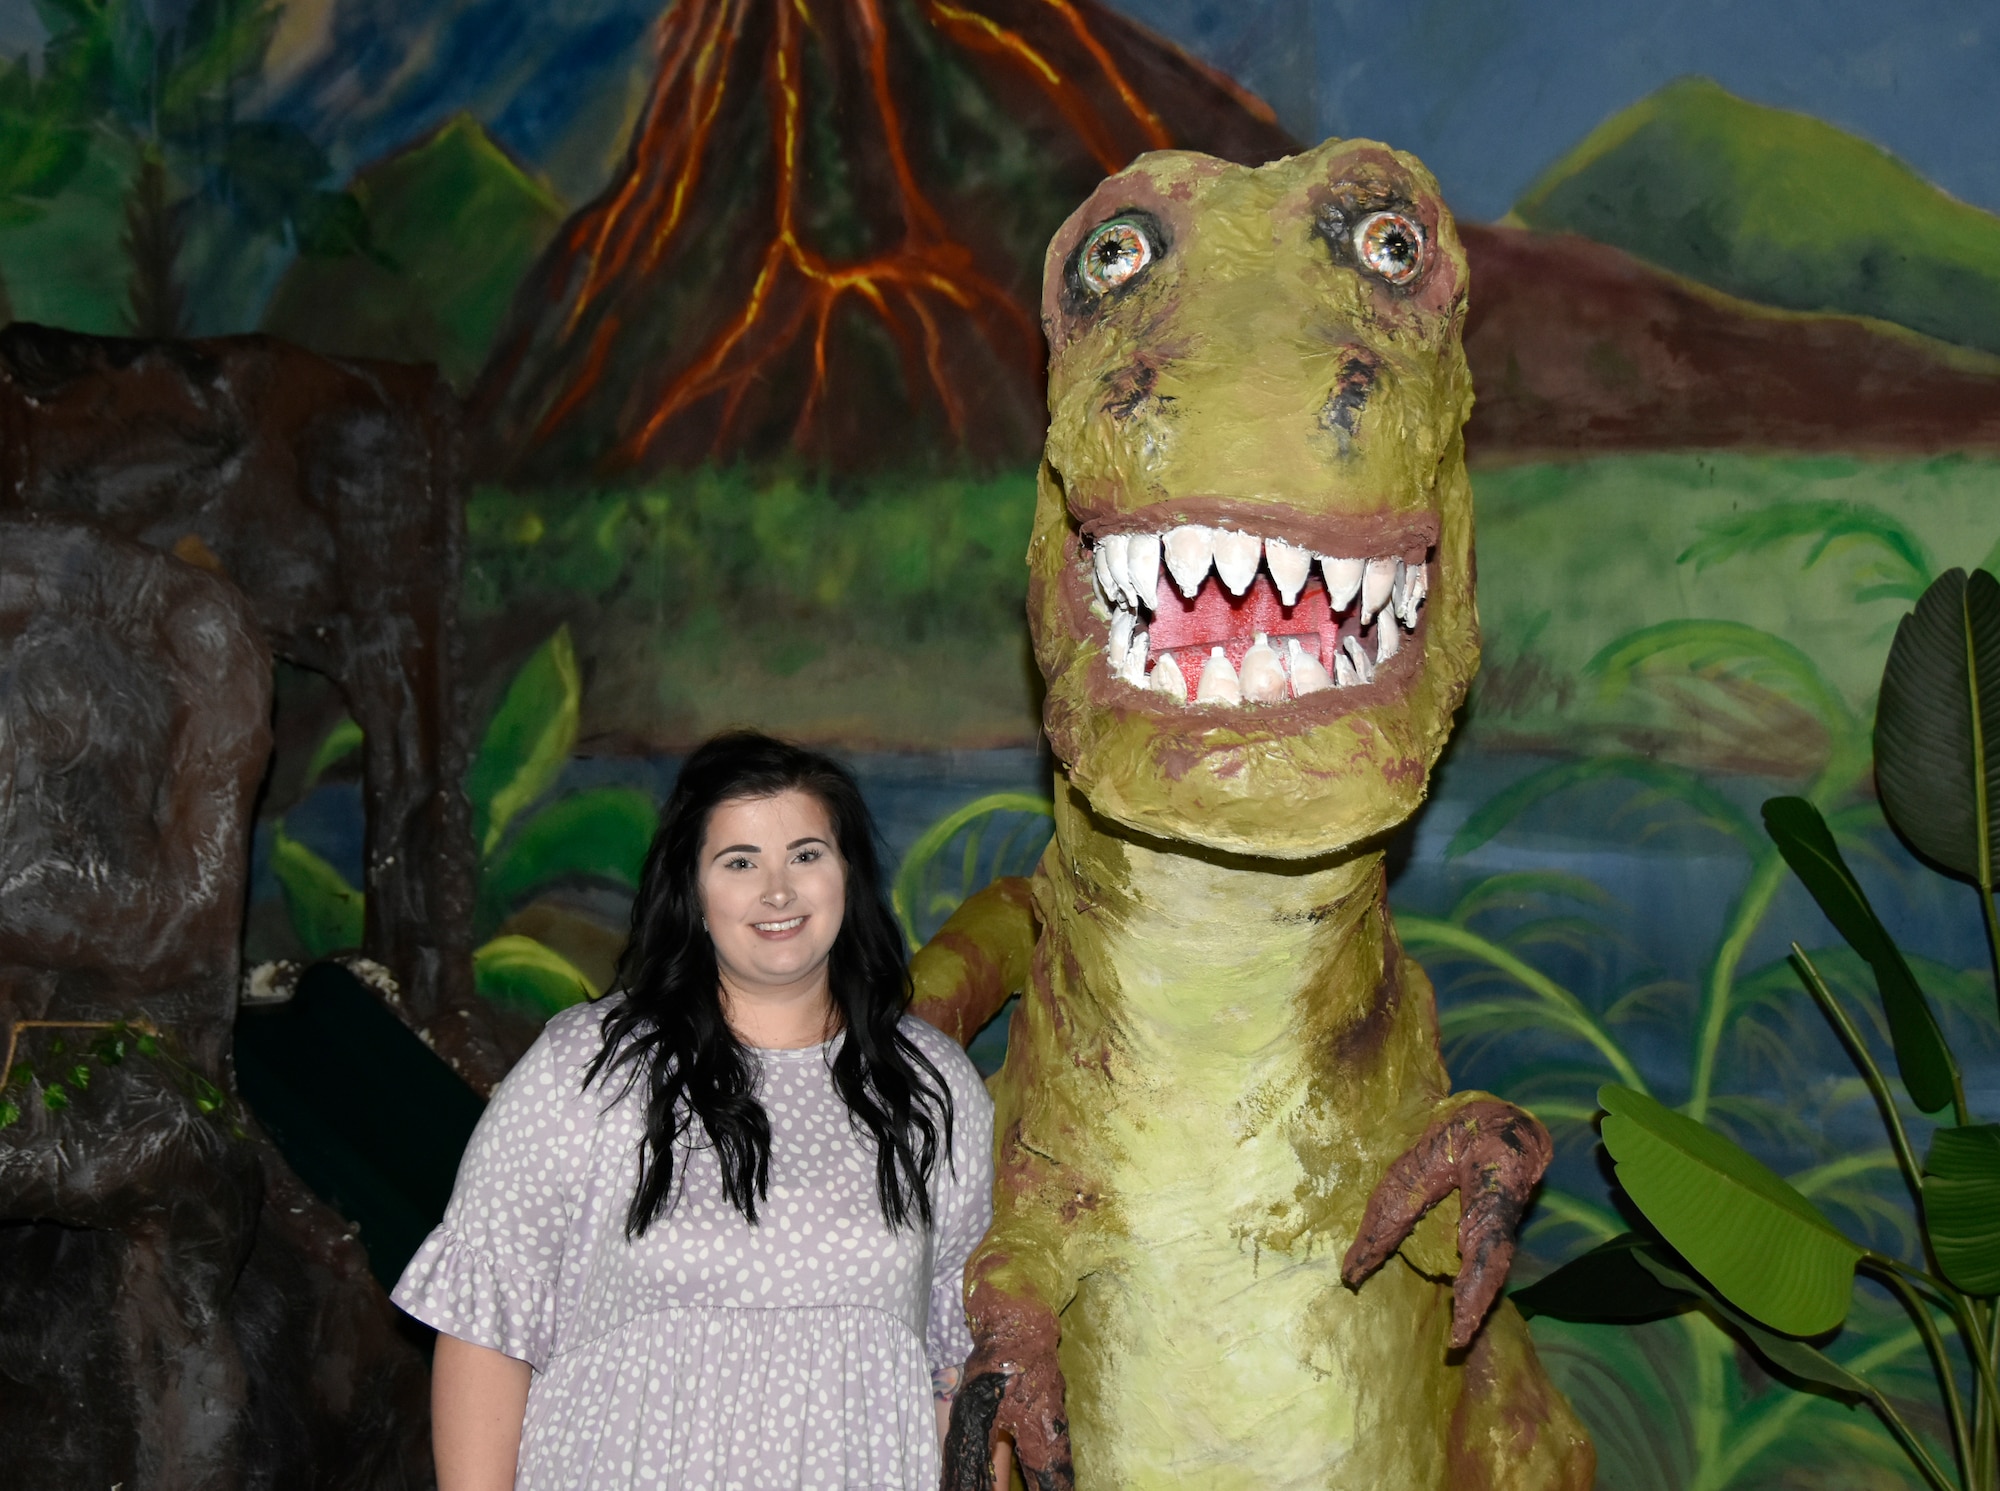 Julia Burgett and a “friend” pose for a photo in the “Dino Tots” exhibit at the Hands-On Science Center in Tullahoma, Tennessee, Sept. 29, 2022. Burgett began her role as STEM coordinator for Arnold Air Force Base in mid-August. STEM stands for science, technology, engineering and math. She is tasked with executing the existing Arnold AFB STEM and growing the program through promotion in the community. (U.S. Air Force photo by Bradley Hicks)